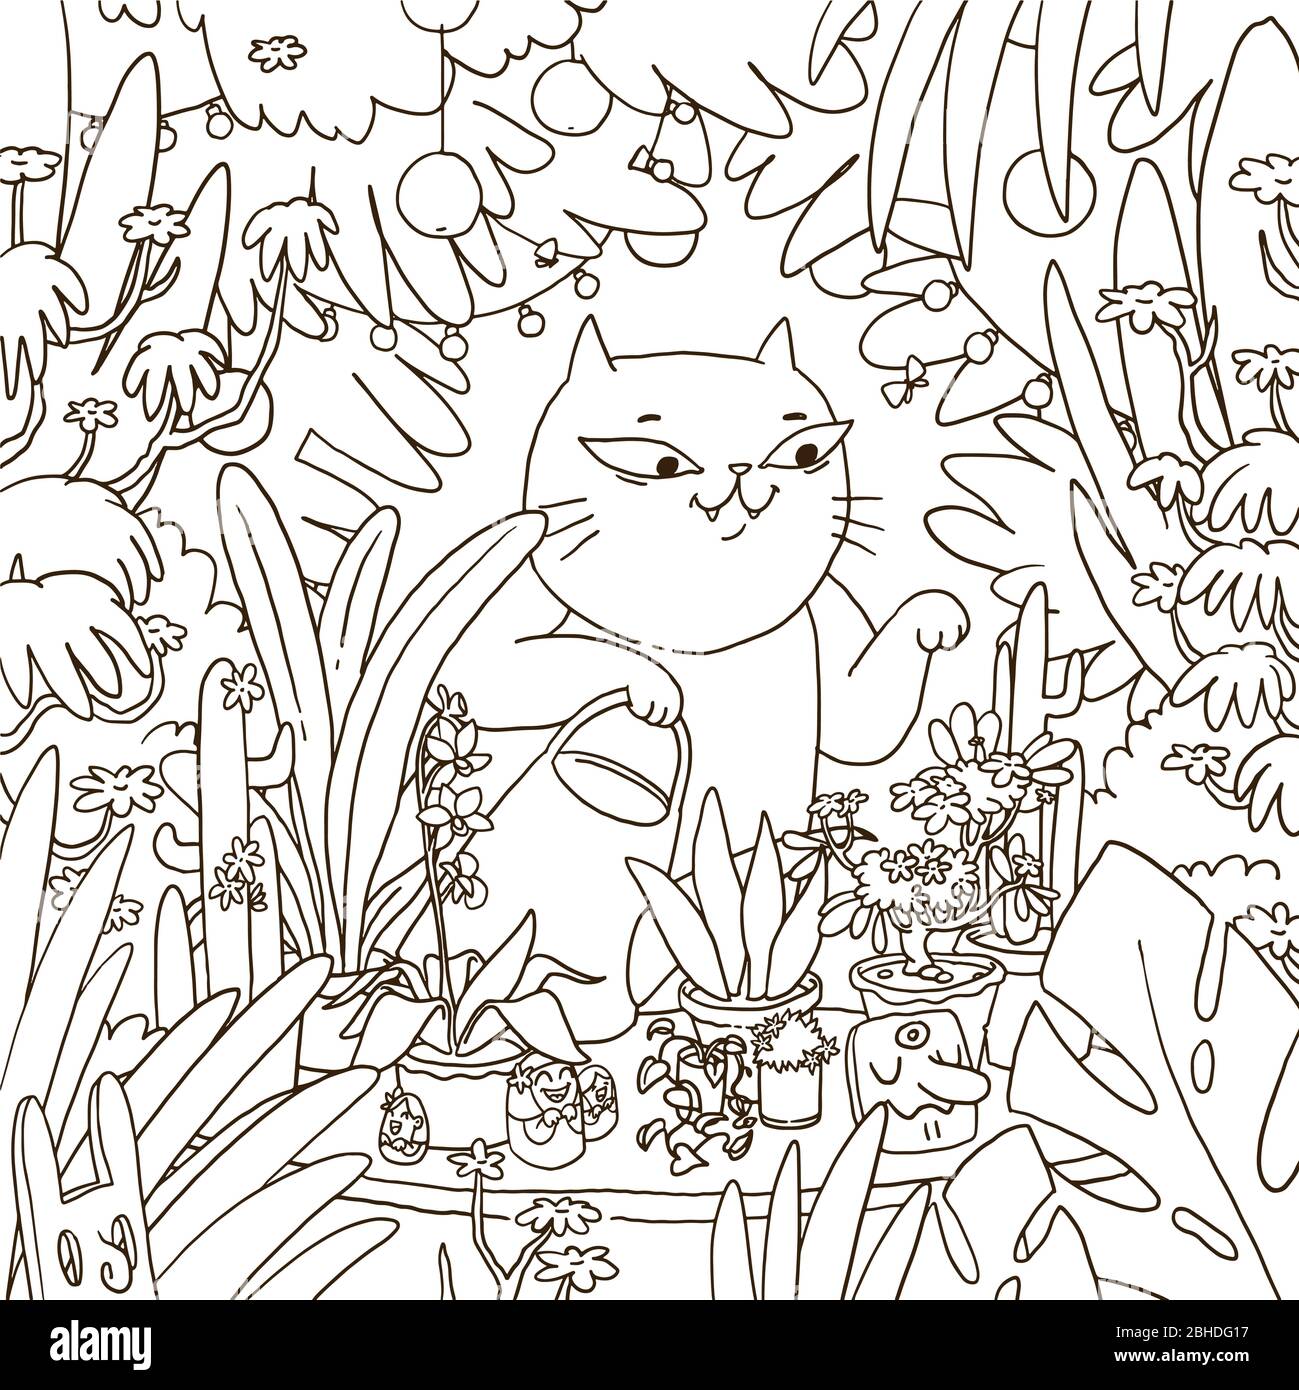 Black and white cat garden cut out stock images pictures